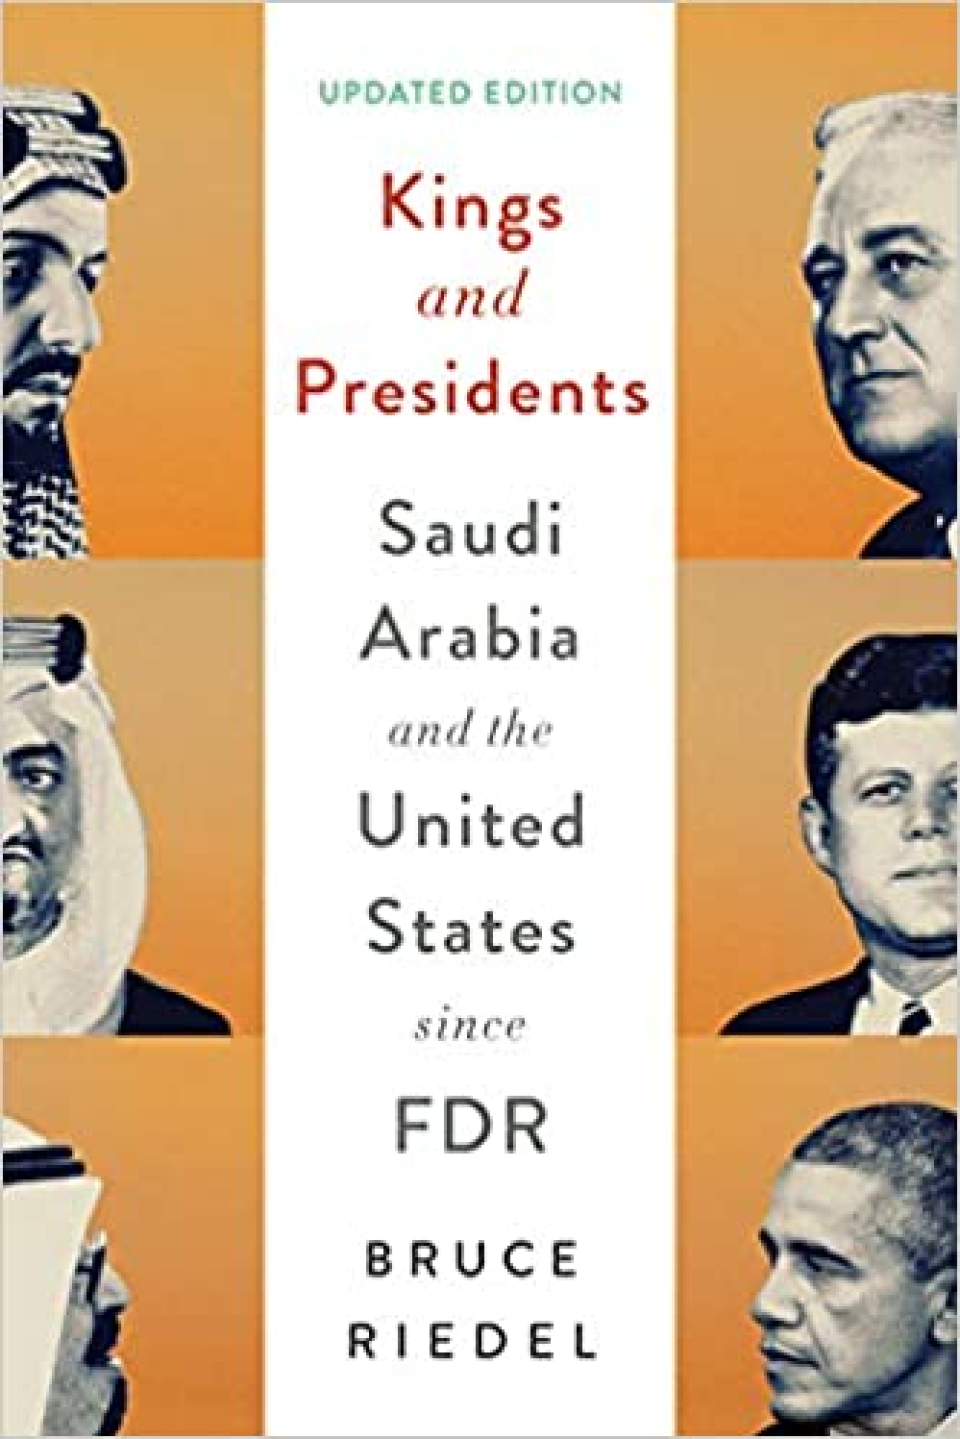 Kings and Presidents: Saudi Arabia and the United States since FDR